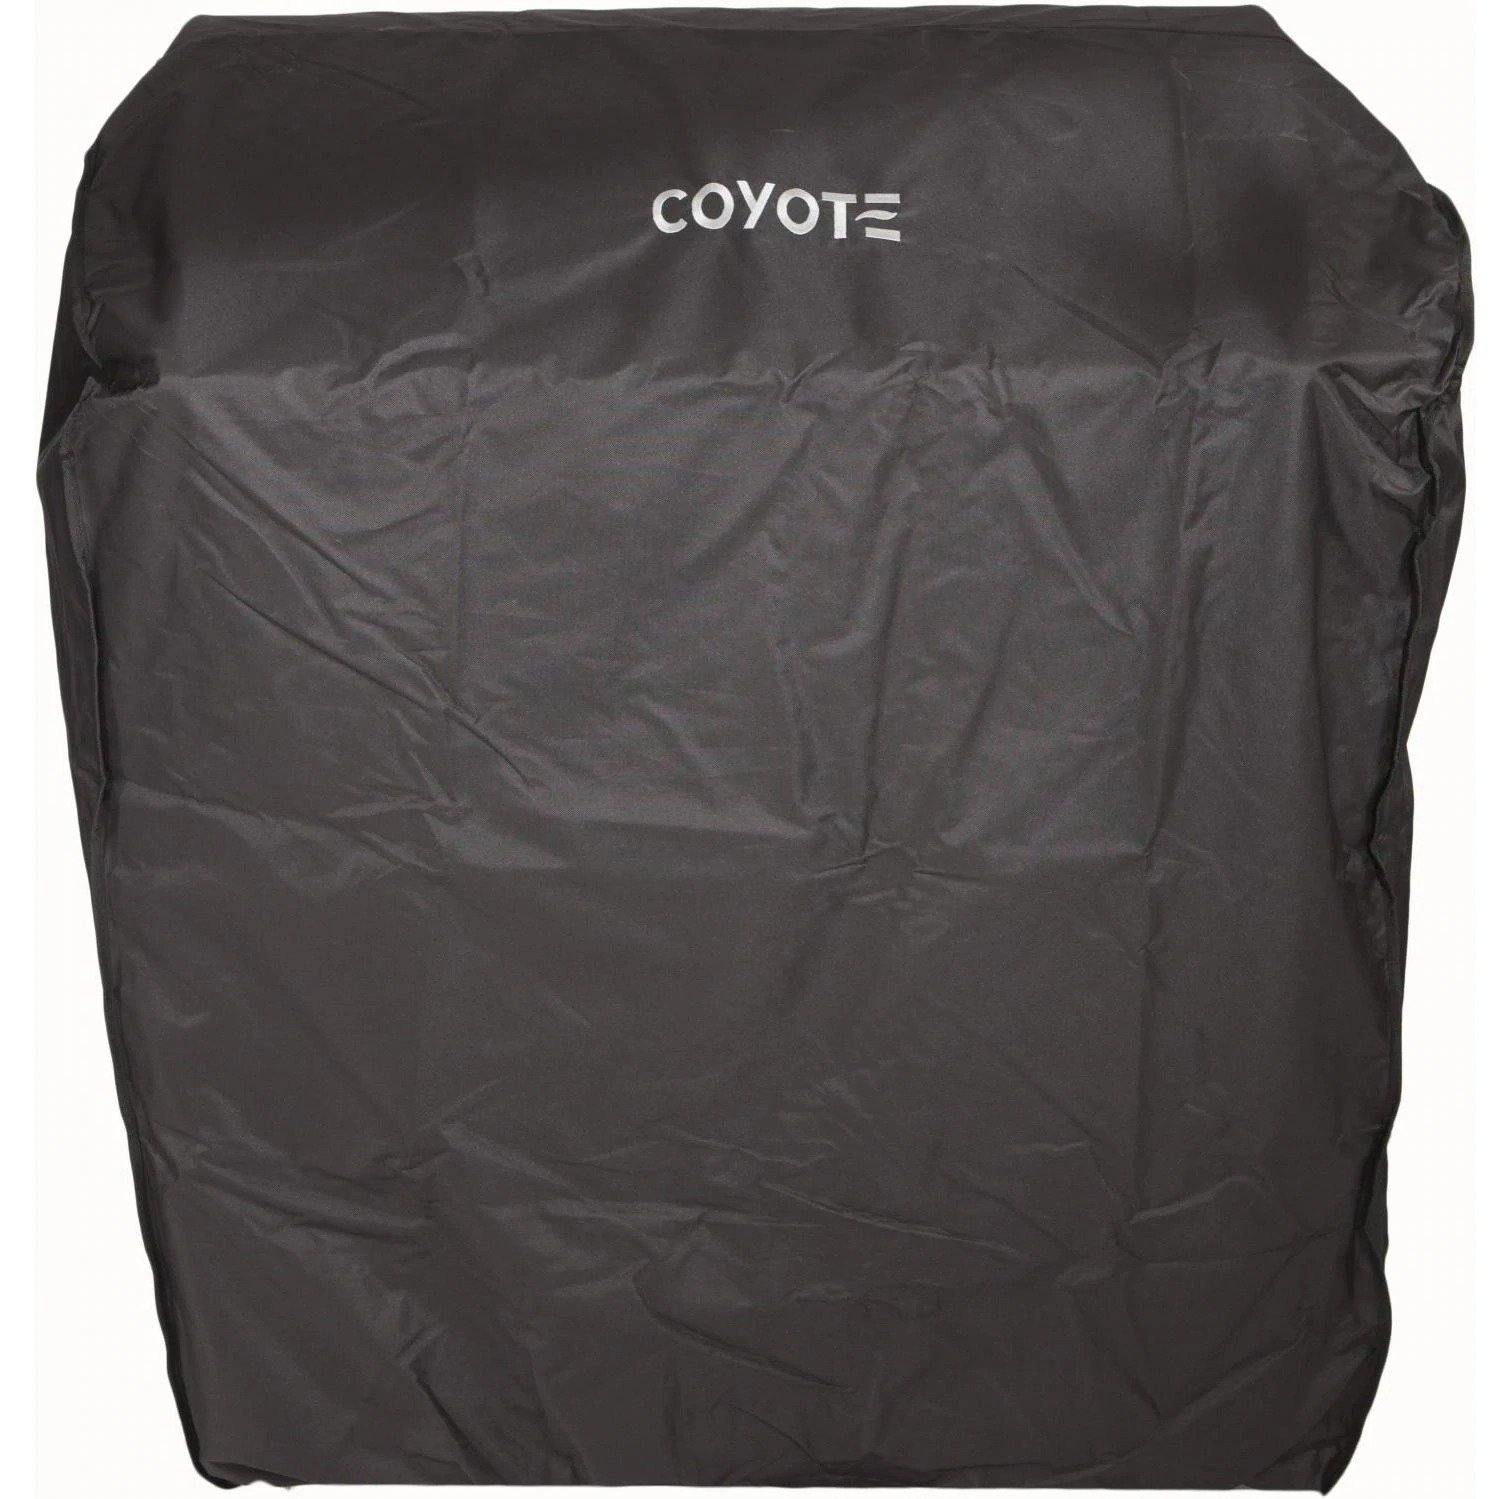 Coyote Side Burner Coyote - CH50 Grill Cover (Grill plus Cart)